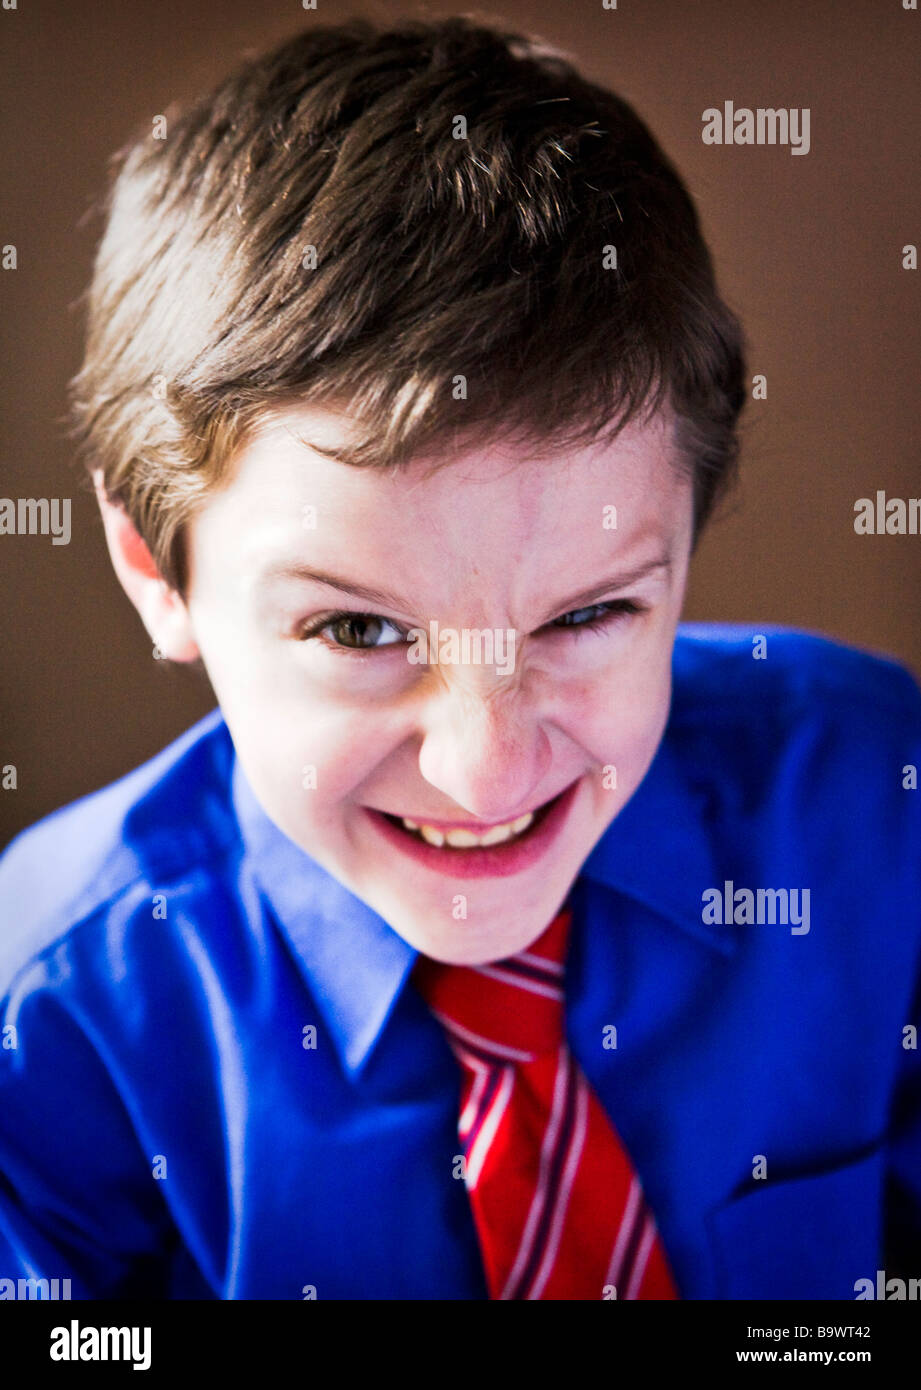 young boy in shirt and tie with aggressive look on his face Stock Photo